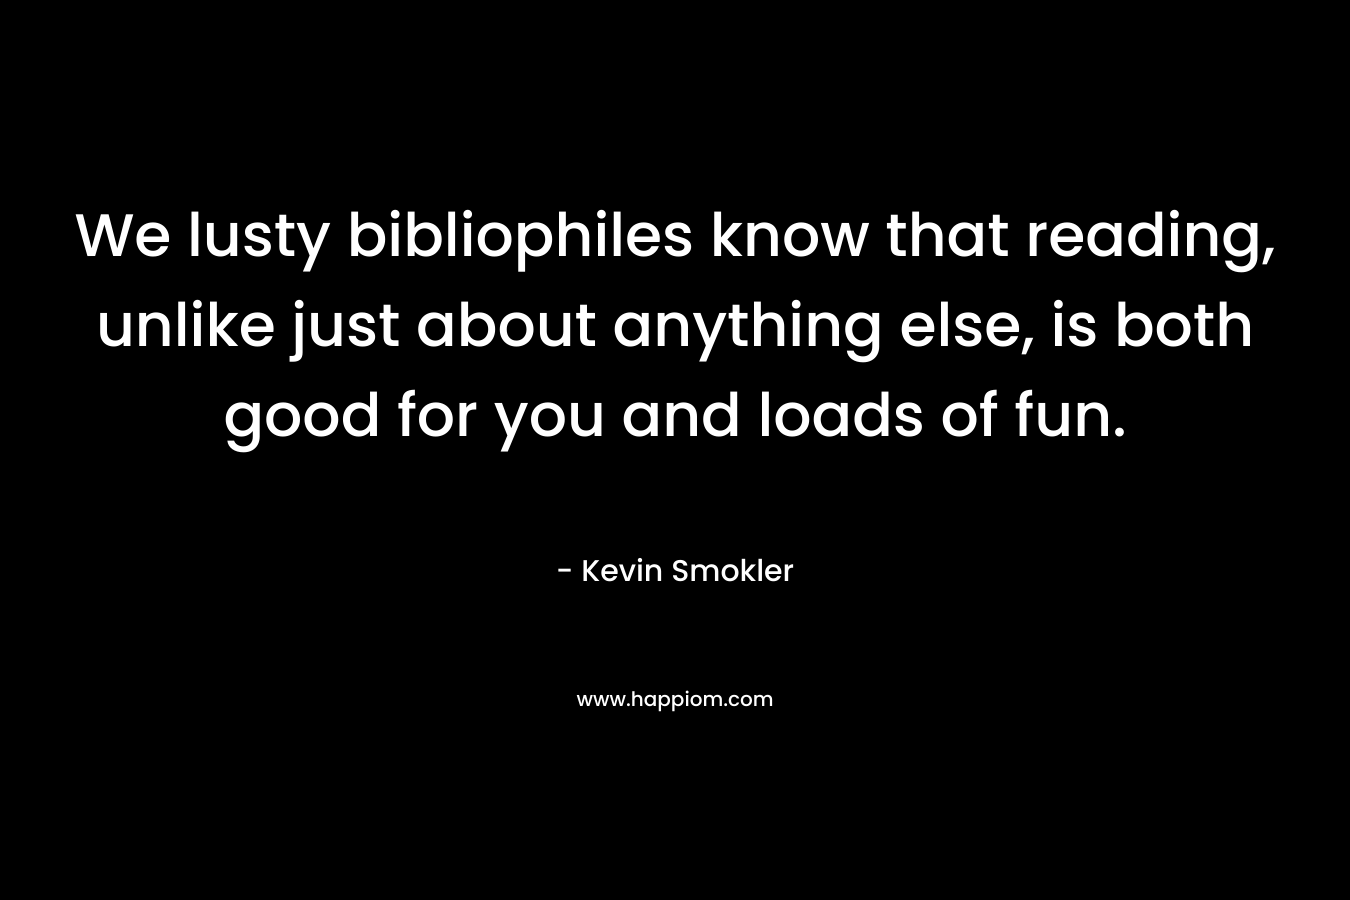 We lusty bibliophiles know that reading, unlike just about anything else, is both good for you and loads of fun. – Kevin Smokler